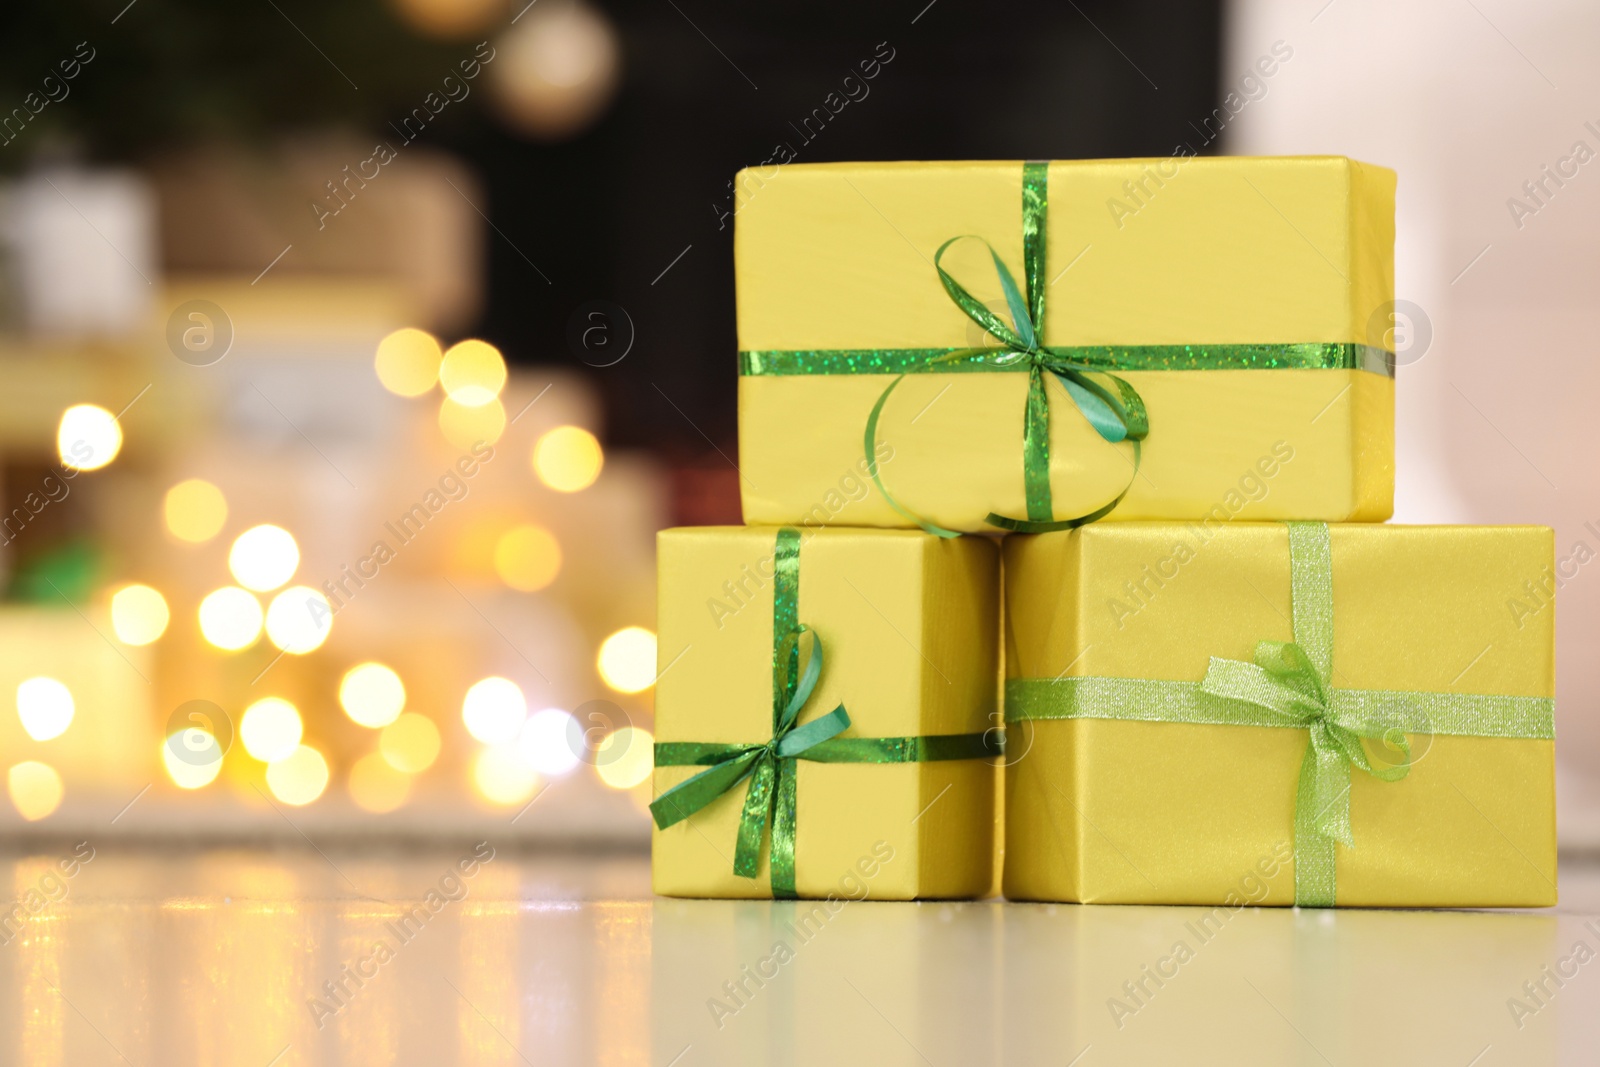 Photo of Beautifully wrapped gift boxes against blurred festive lights, space for text. Christmas celebration